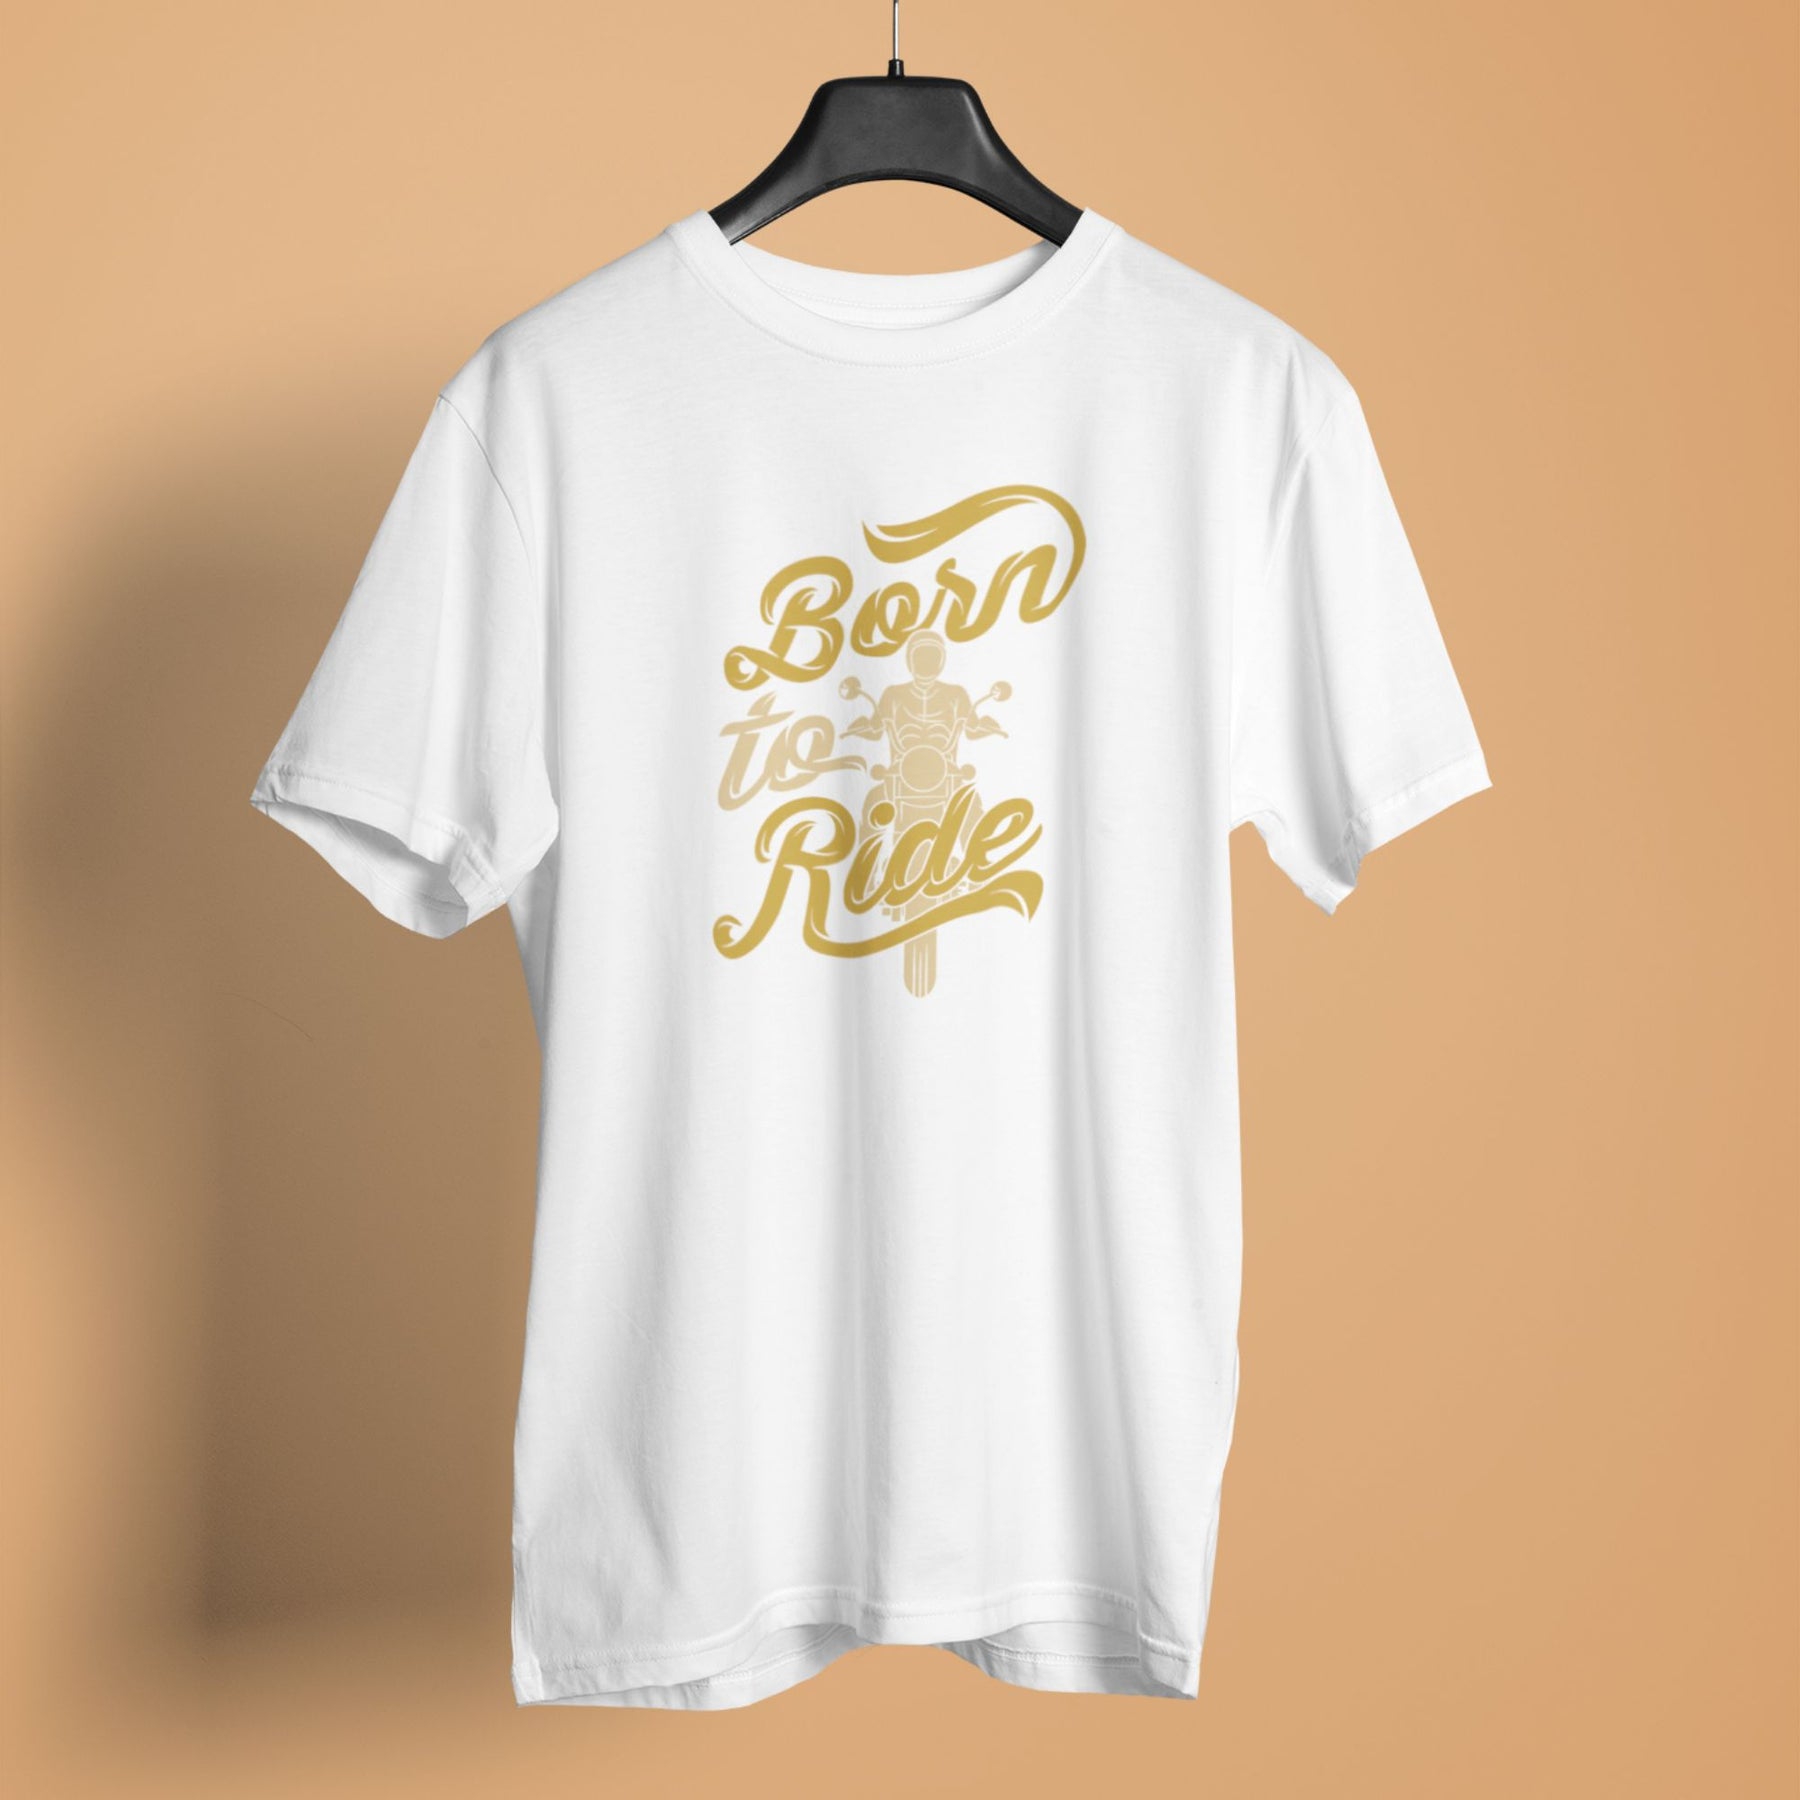 Born to ride t-shirt